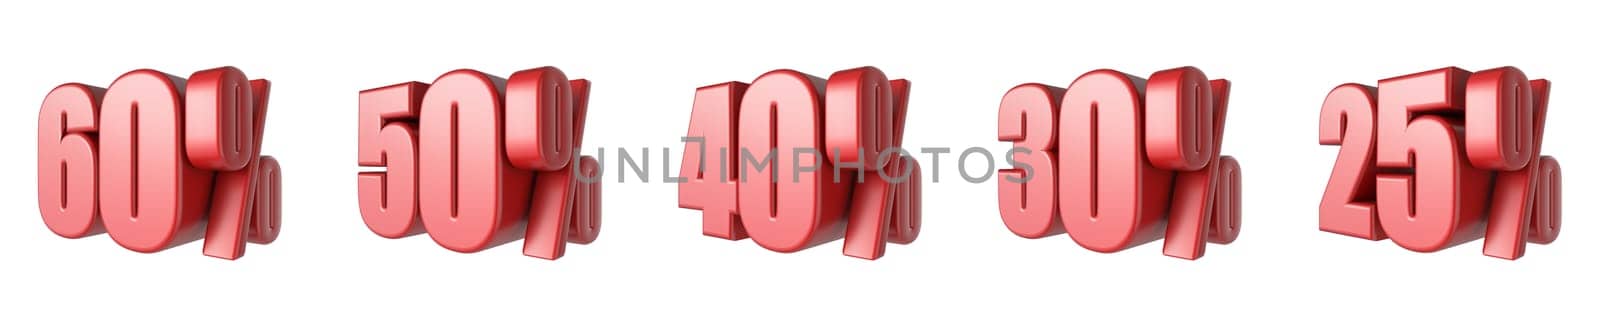 25, 30, 40, 50, 60 Red percent signs 3D rendering illustration isolated on white background